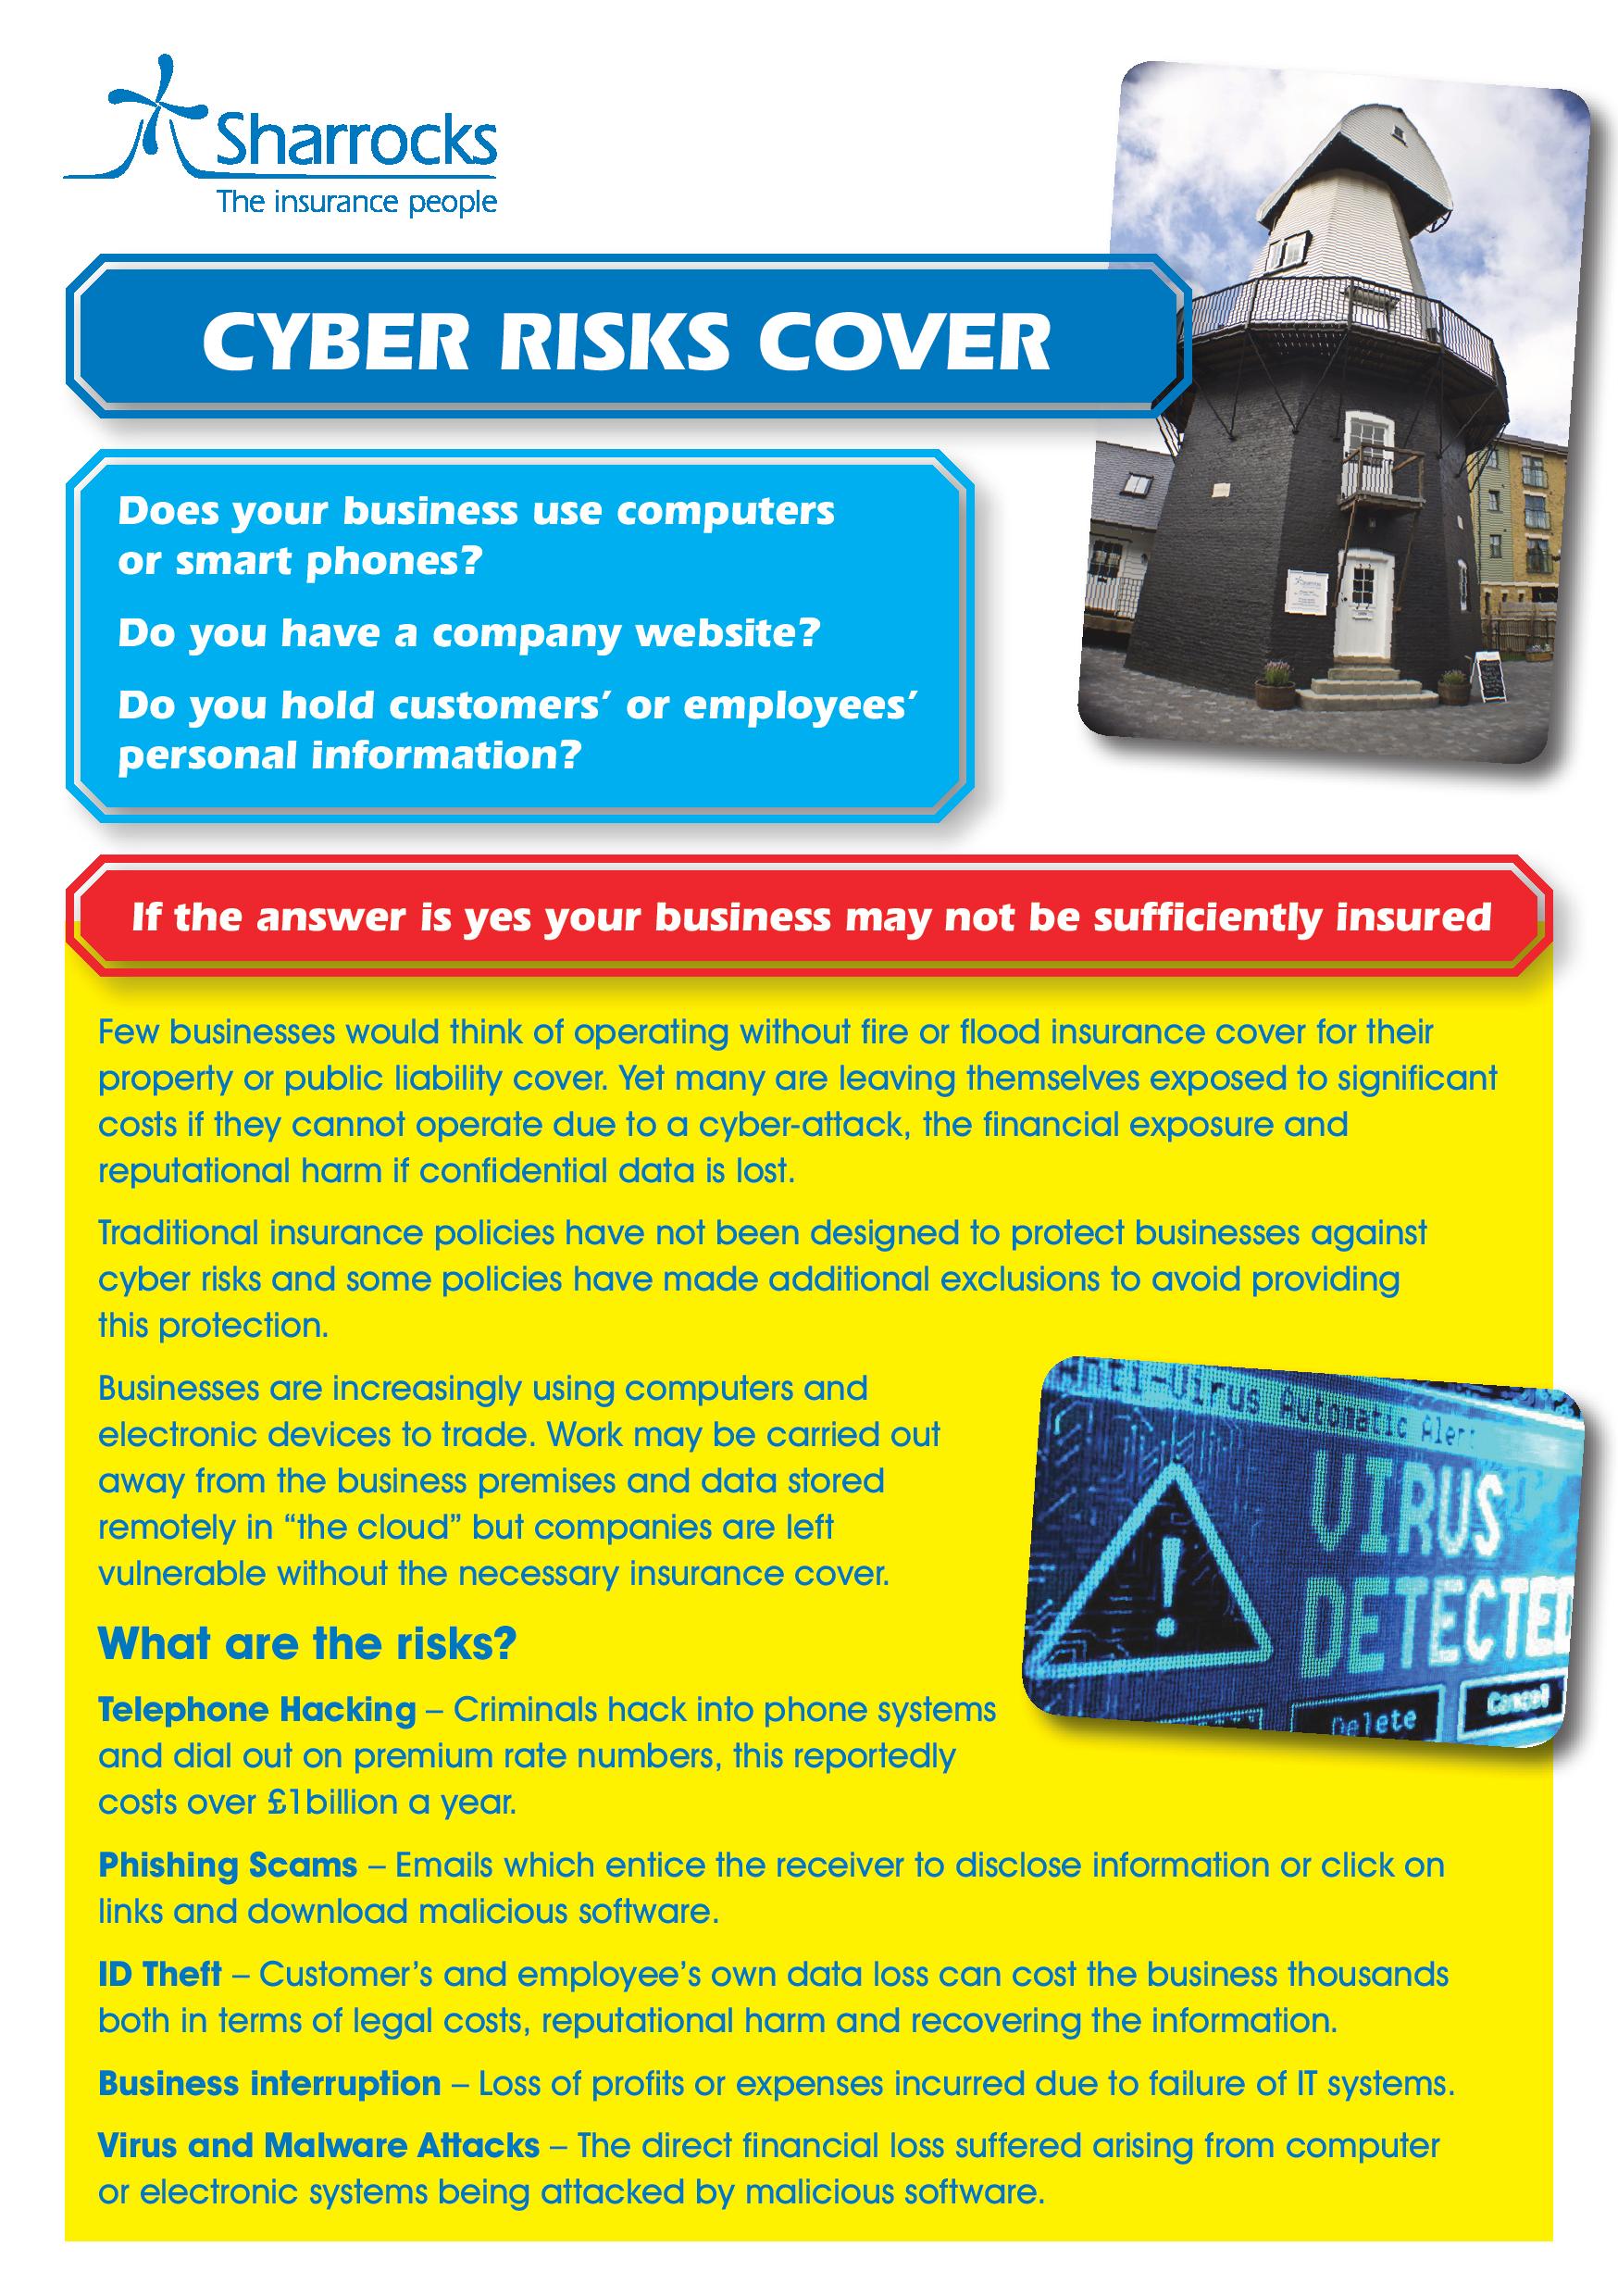 Sharrocks' Guide to Cyber Risks Cover page 1